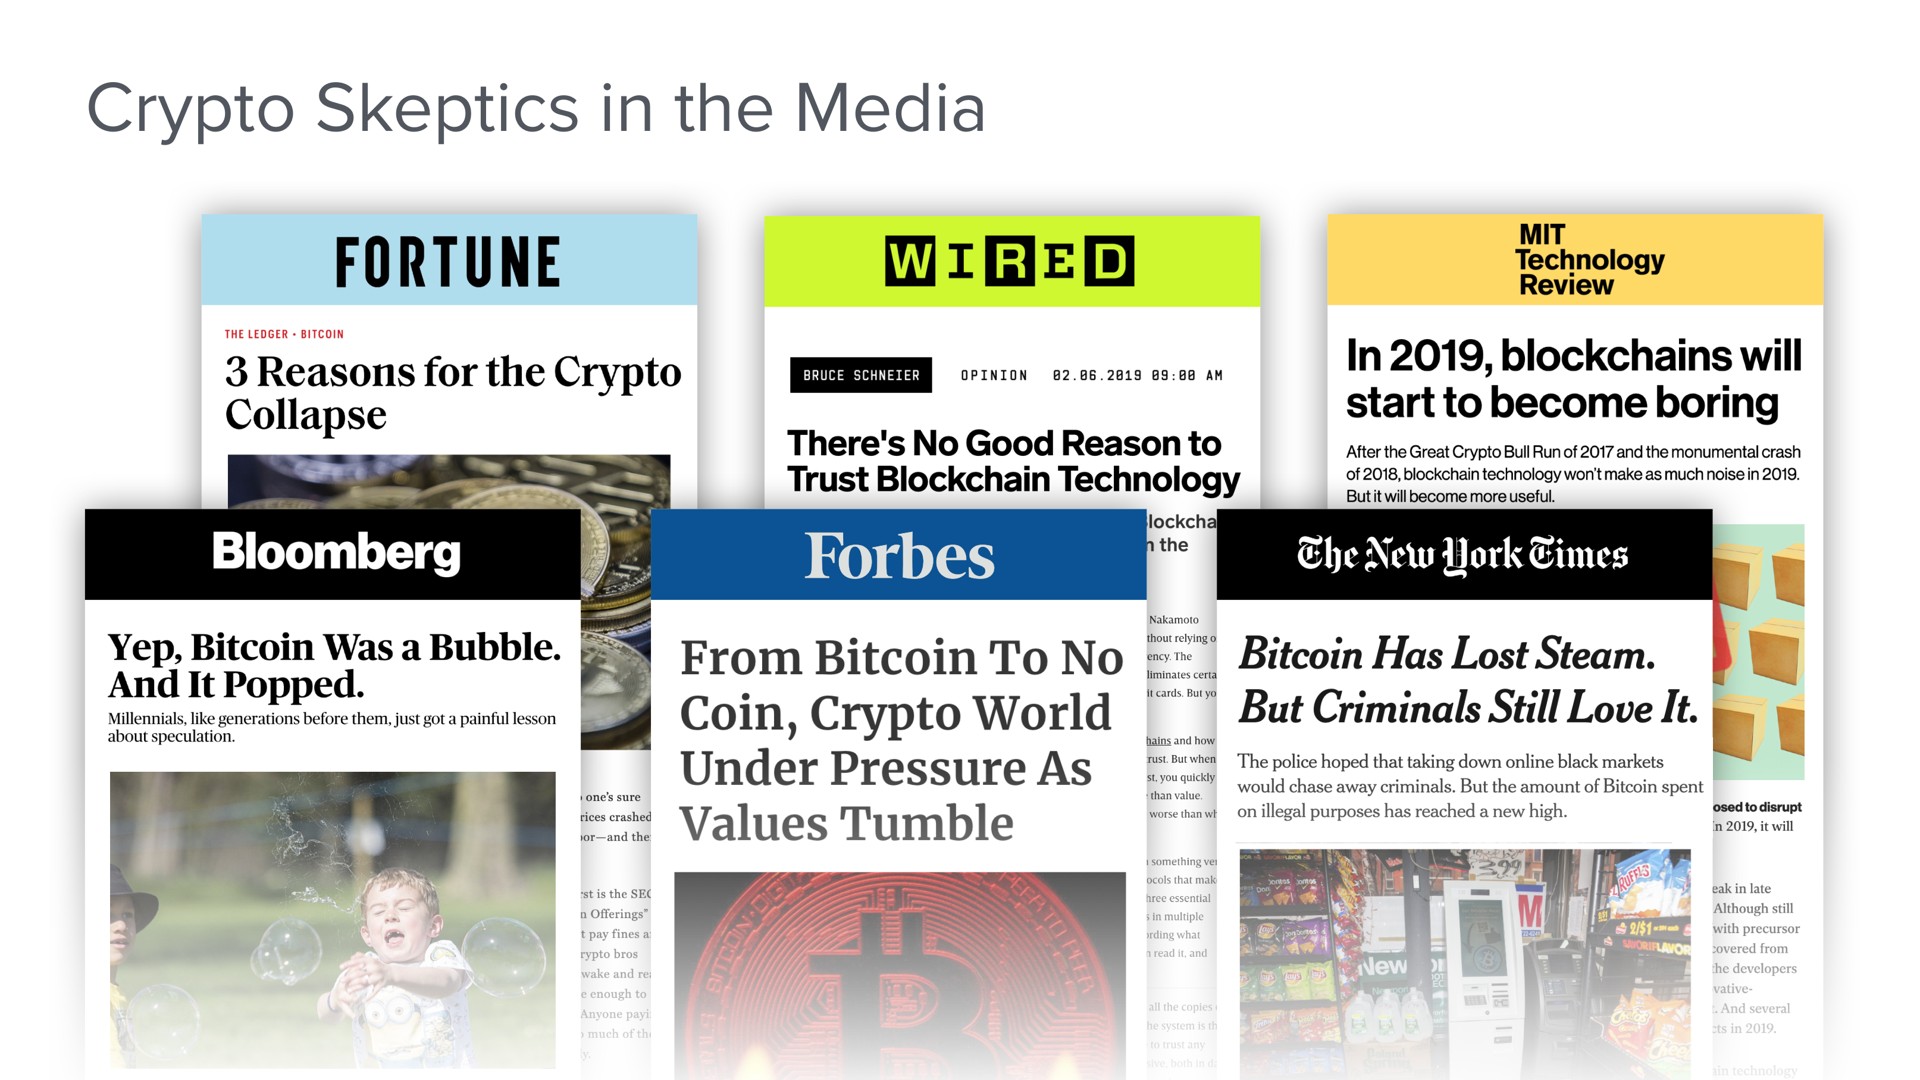 skeptics in the media reasons for collapse ray will start to become boring coin world but criminals still love it | a16z